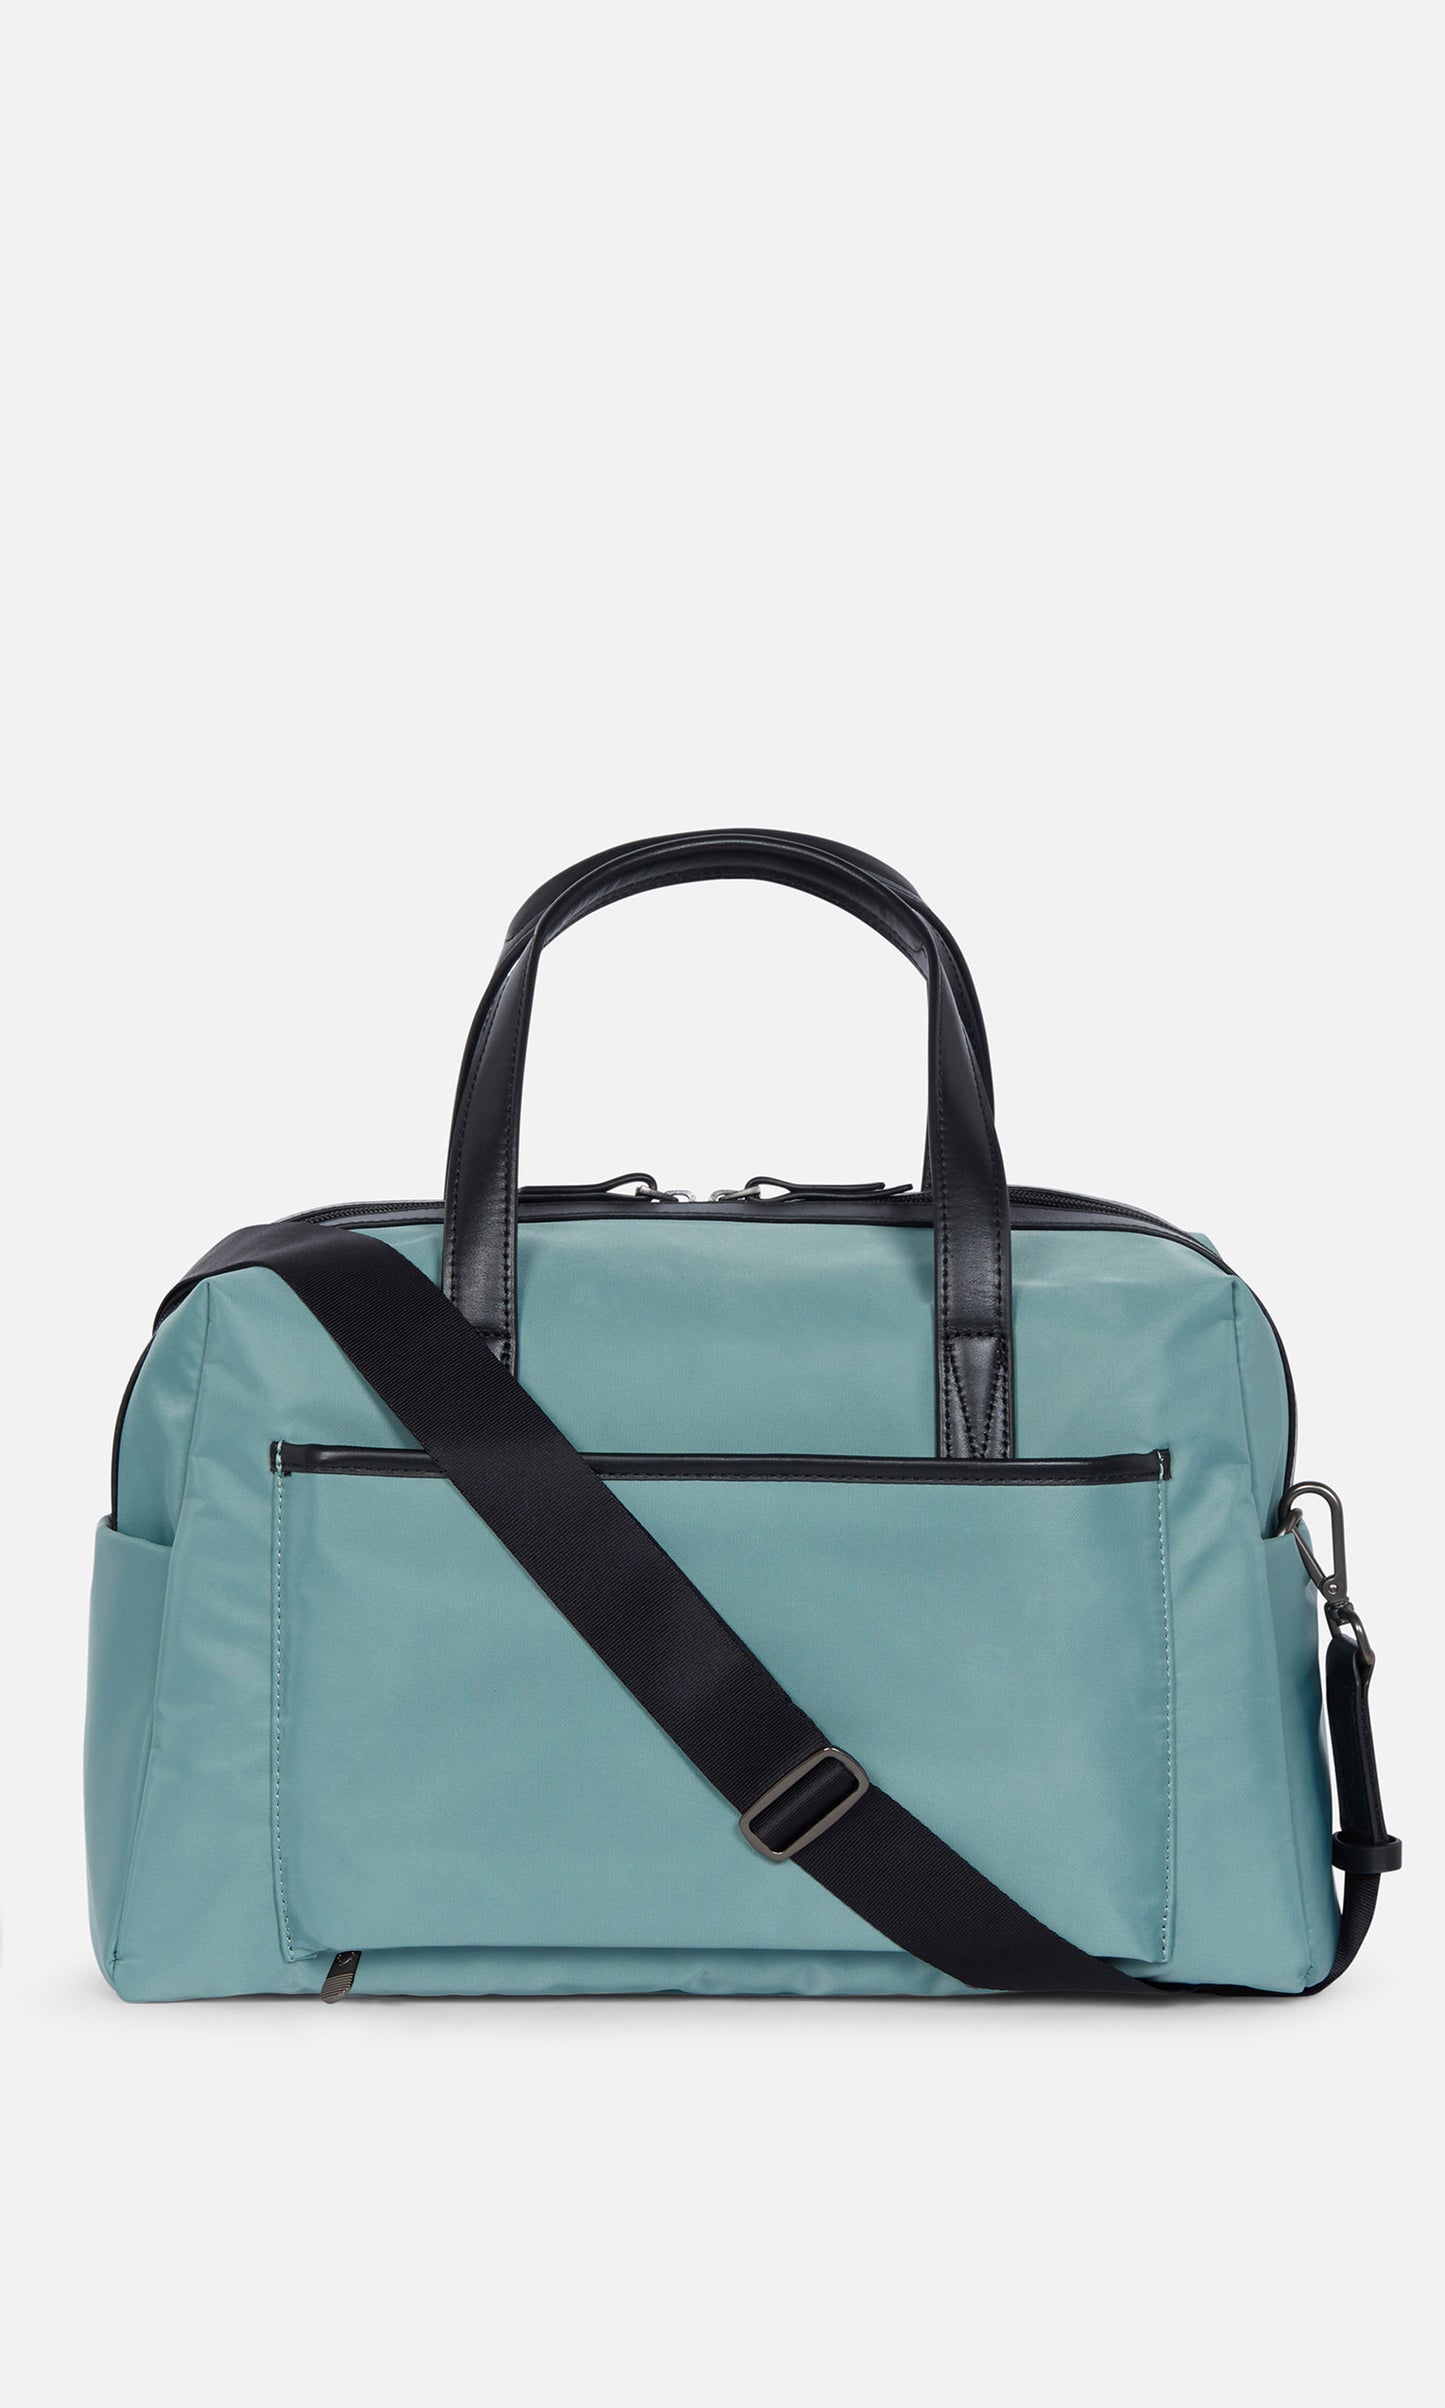 Chelsea overnight bag in mineral